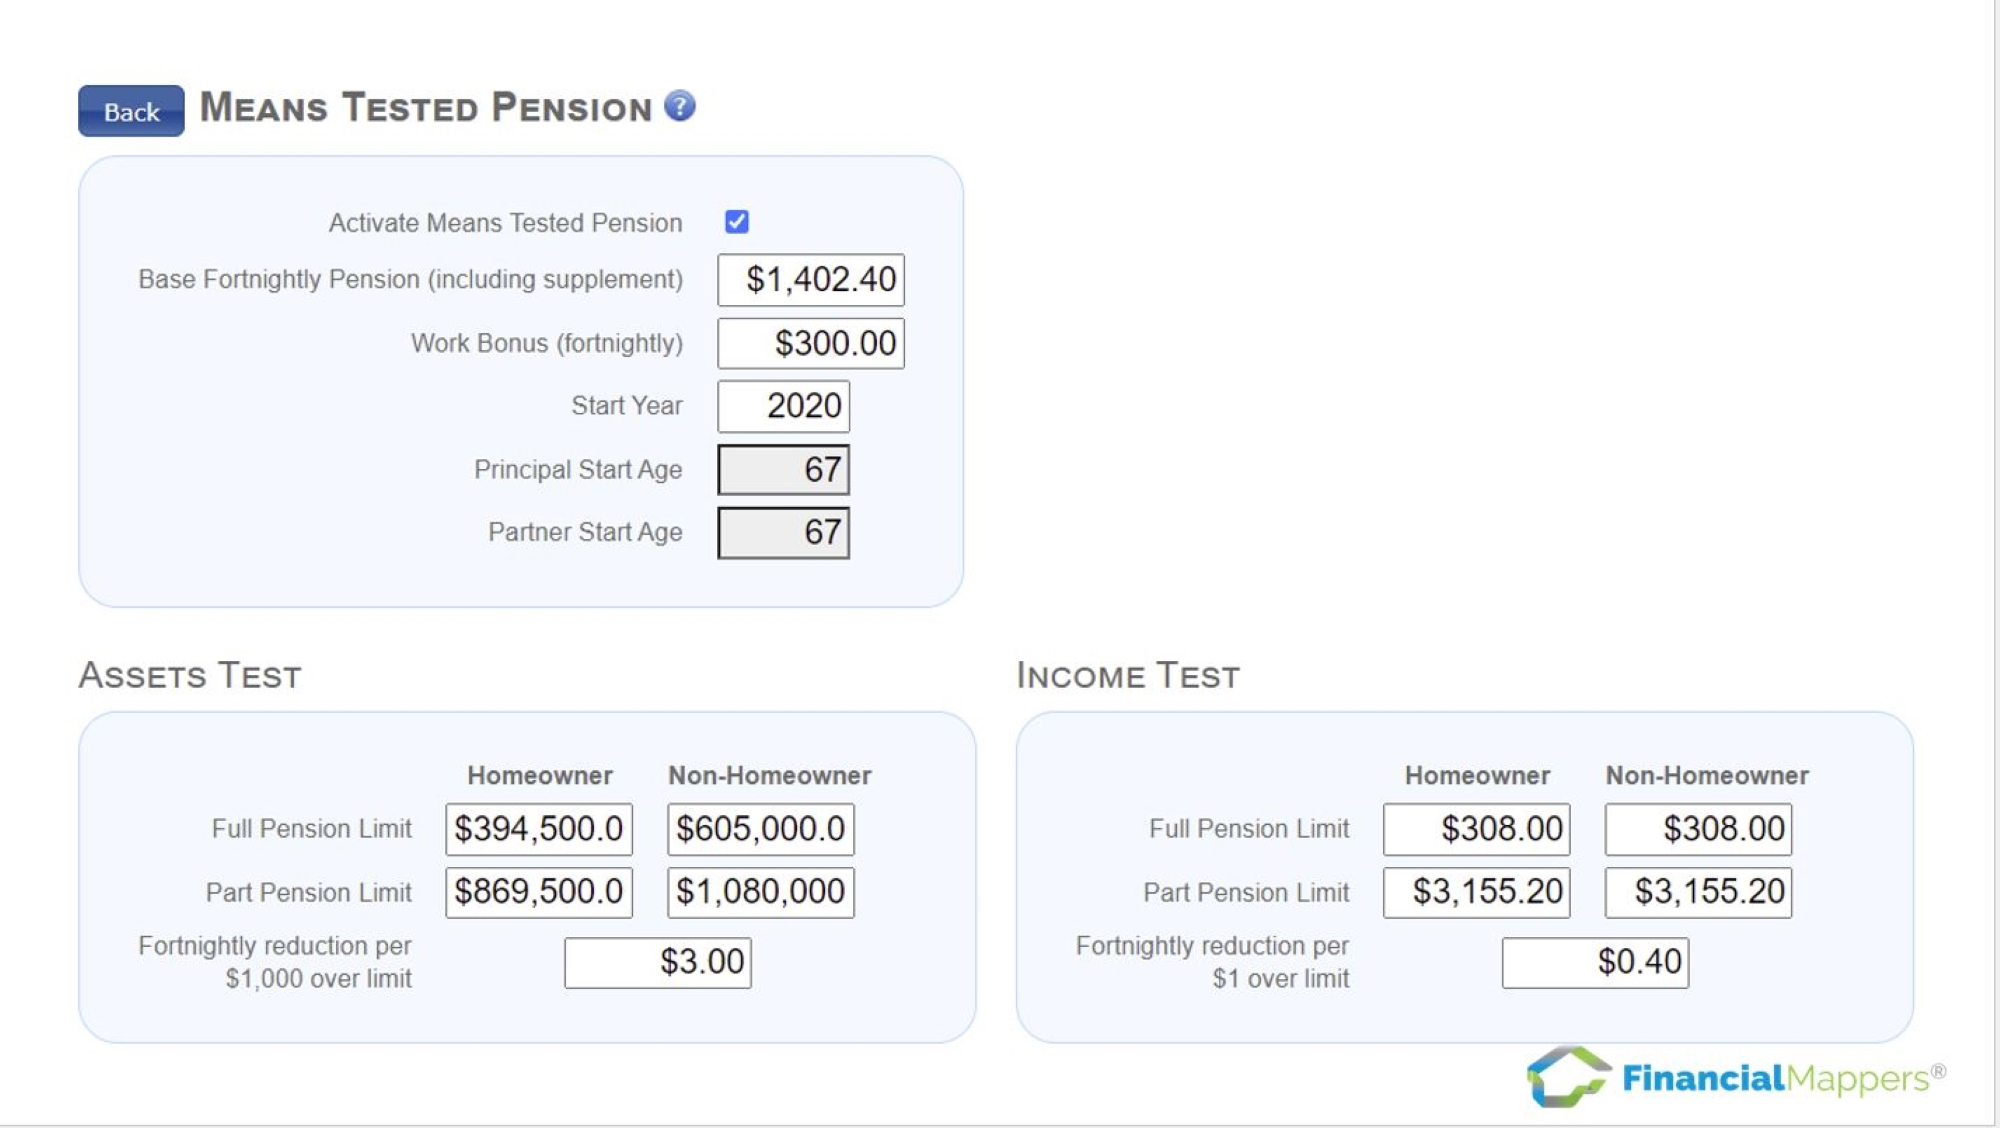 Means Tested Pension Thresholds for Asset Test and Income Test in Financial Mappers cash flow modelling software.